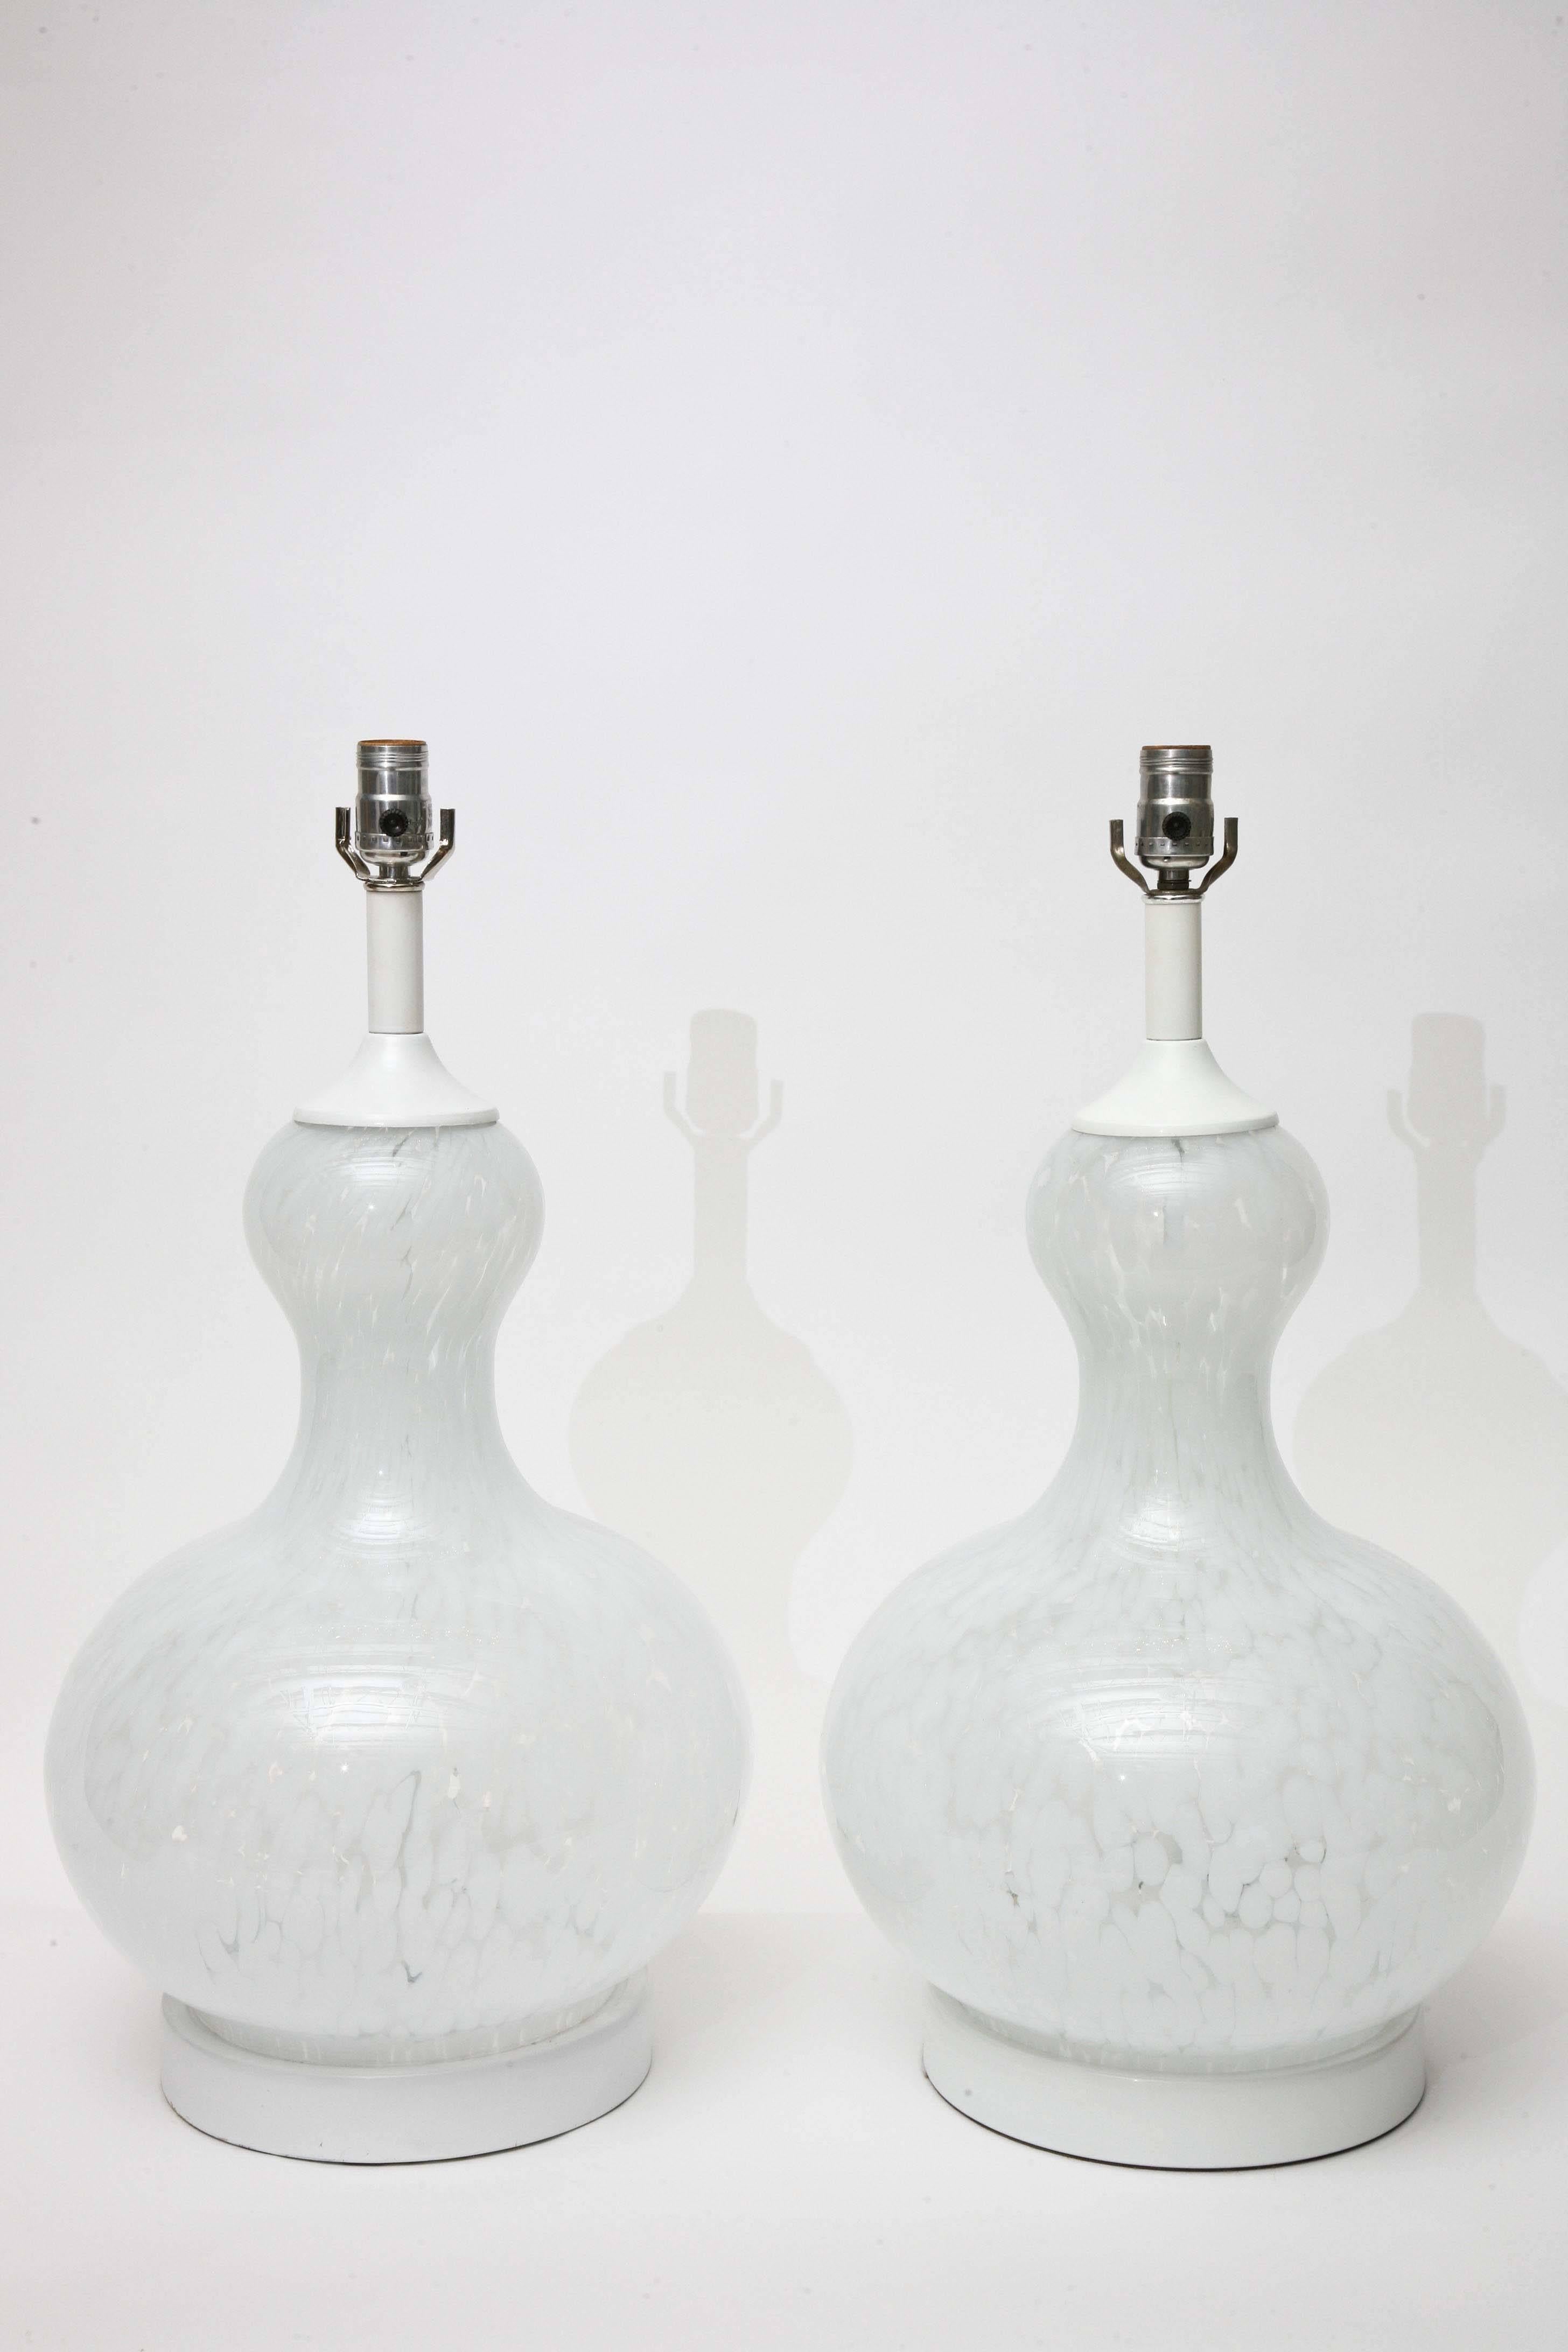 White and clear mottled lamps in handblown Murano glass with original painted metal necks and bases, circa 1970. Measurements below are too top of socket.